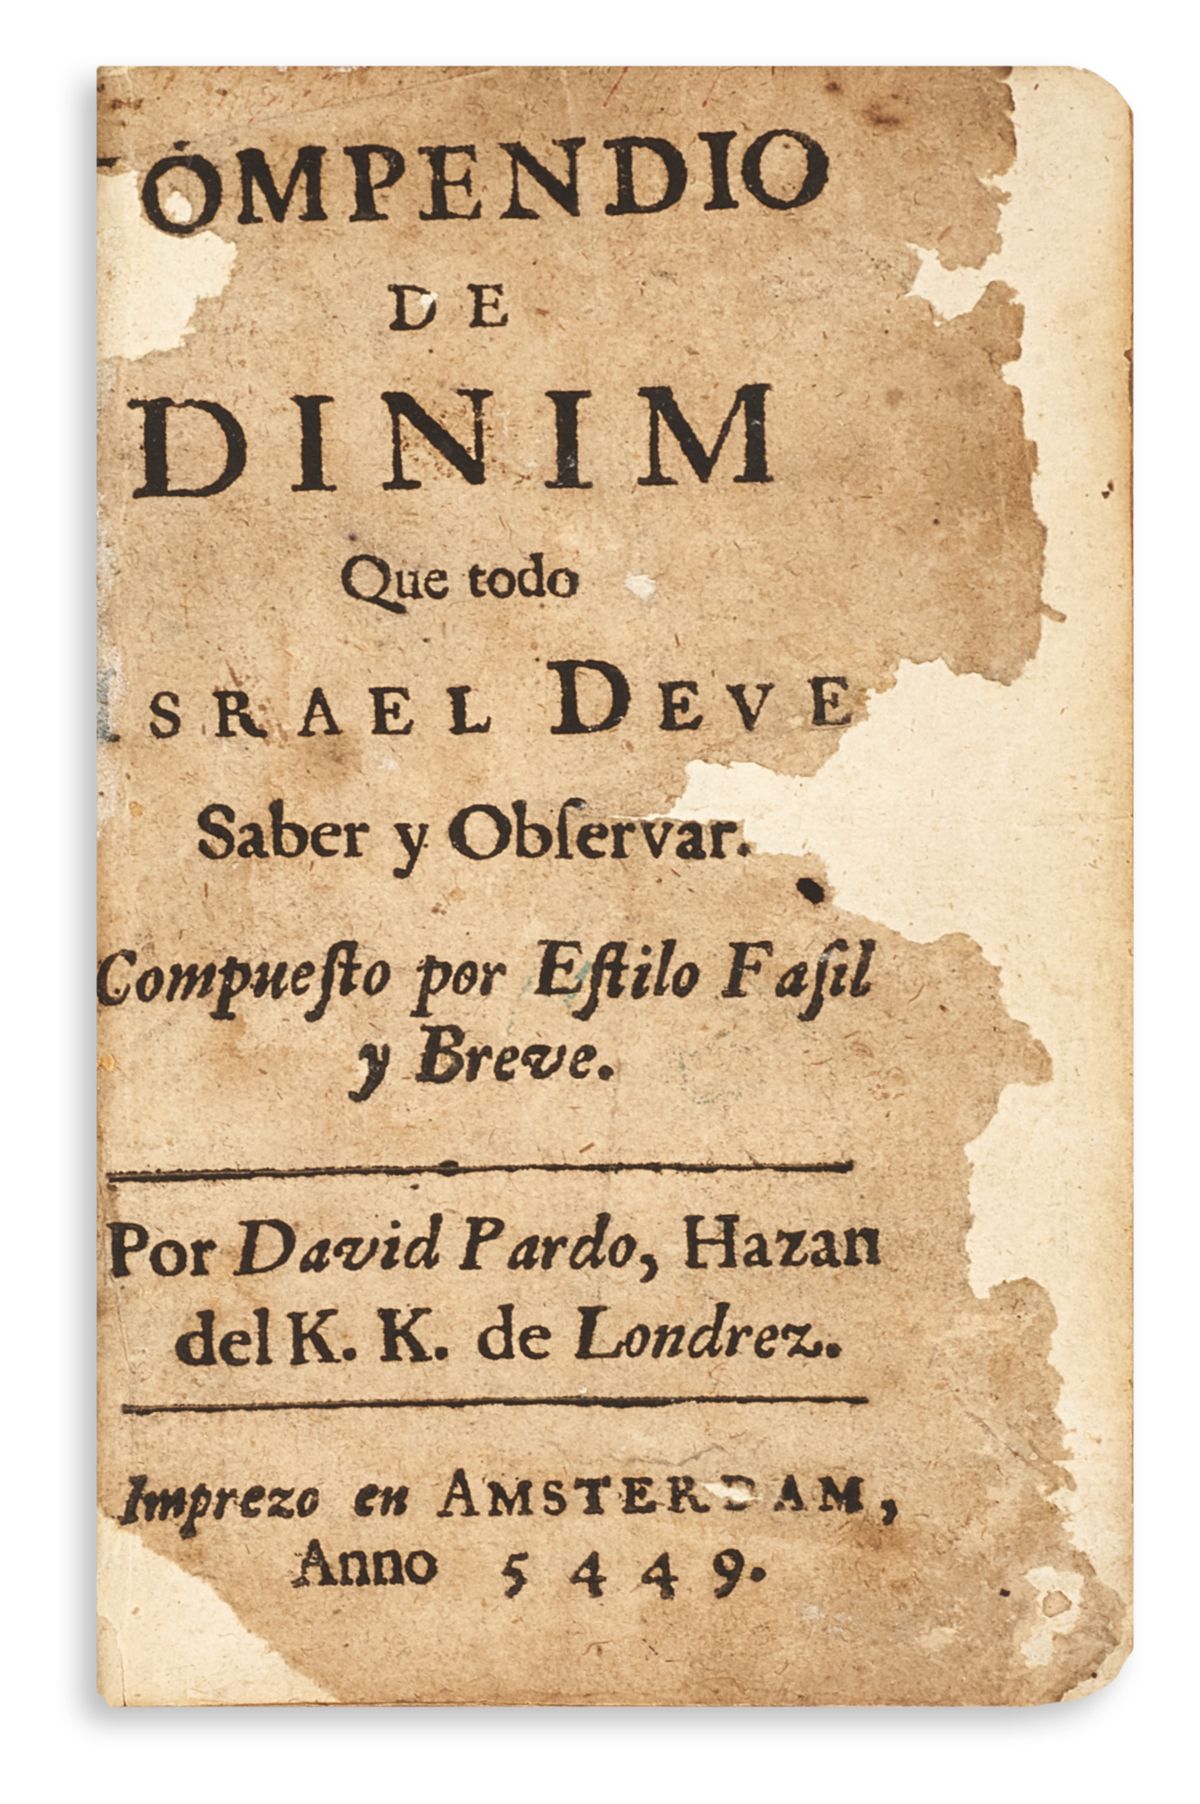 <<David Pardo.>> Compendio de Dinim [anthology of Halachic rules from the Shulchan Aruch]